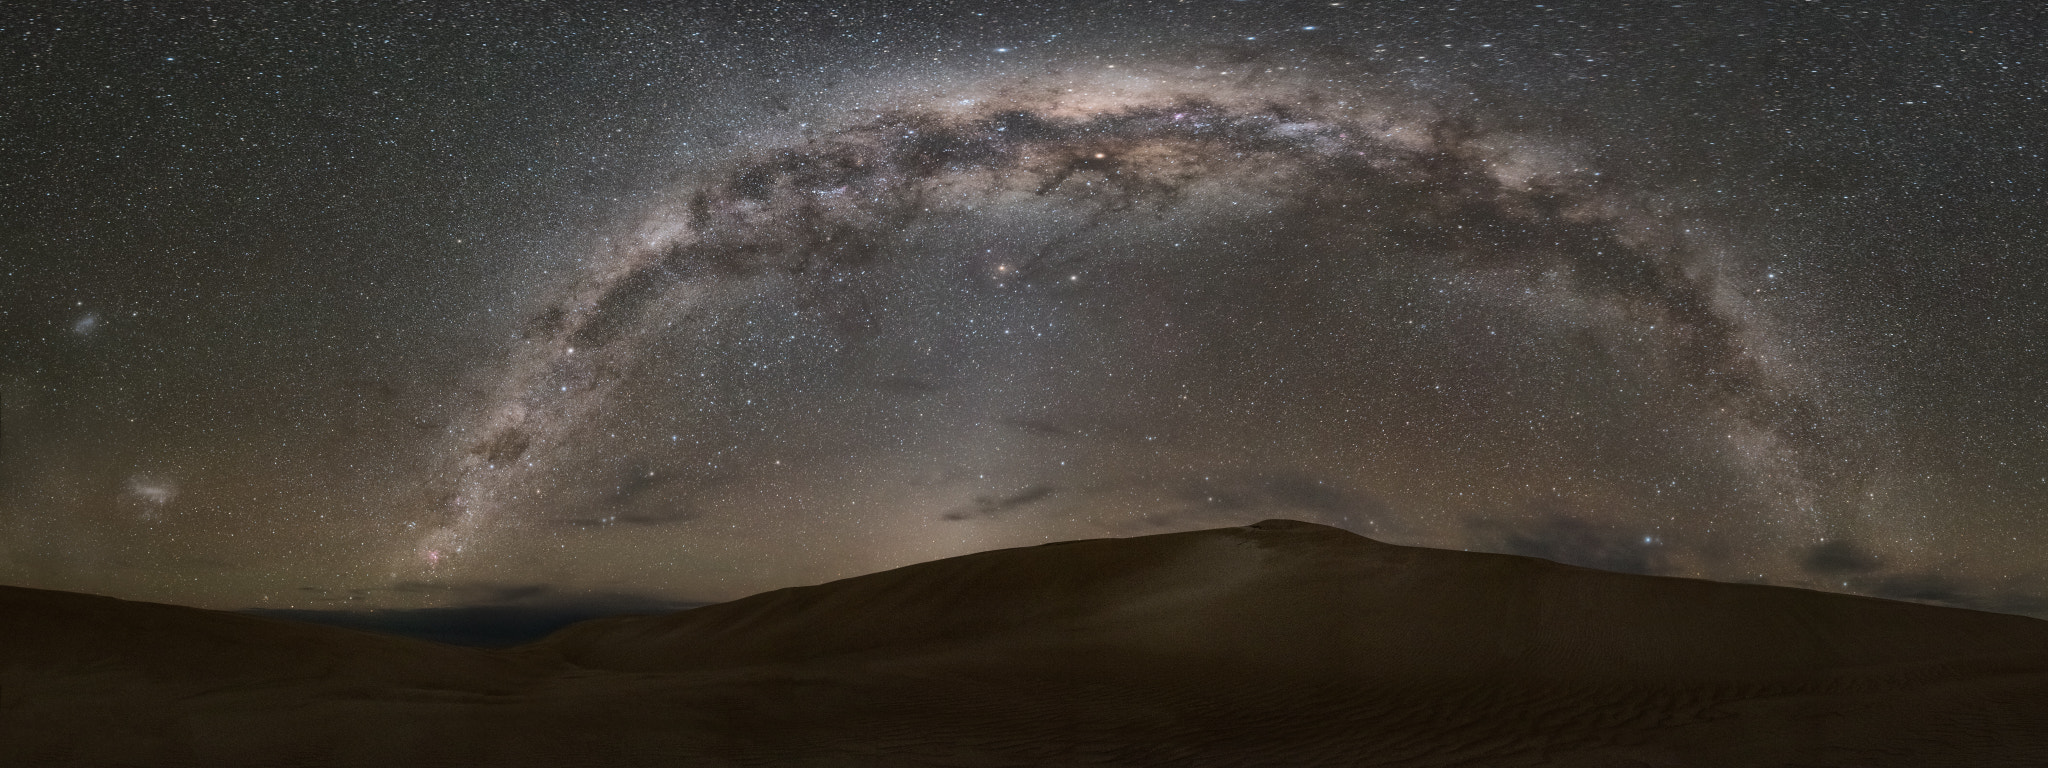 Nikon D810A sample photo. Milky way arch over the dune photography